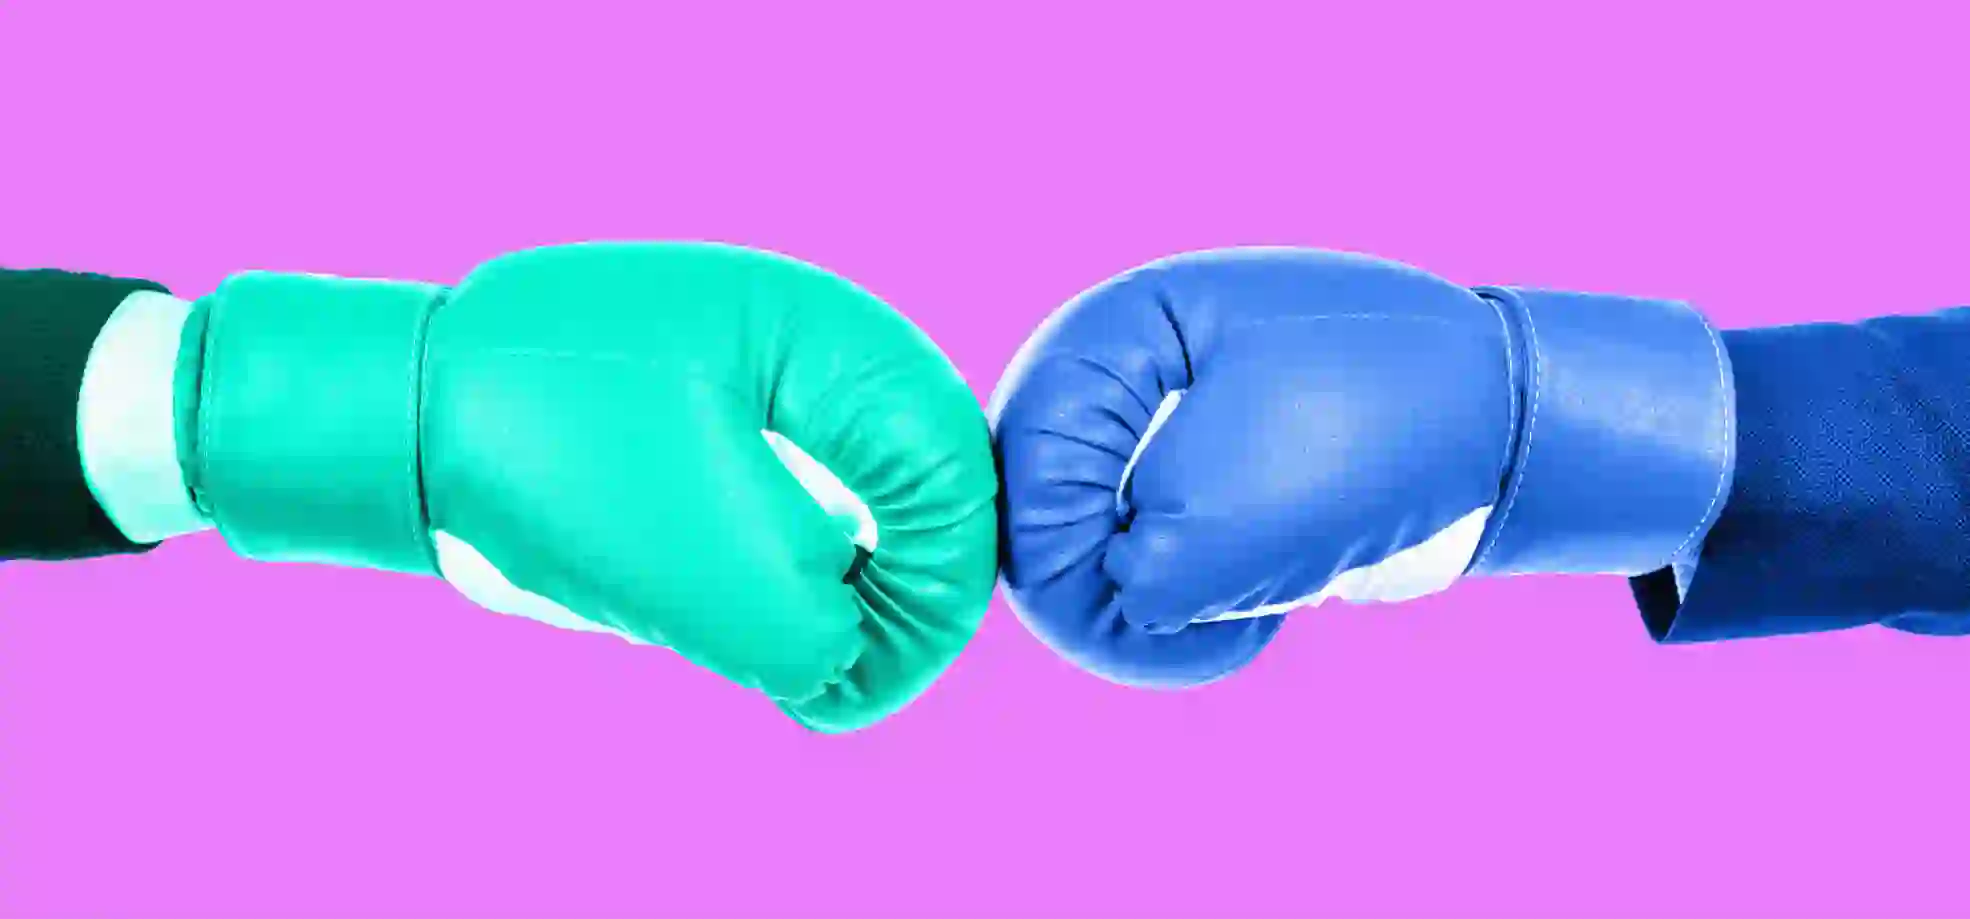 green boxing glove against blue boxing glove